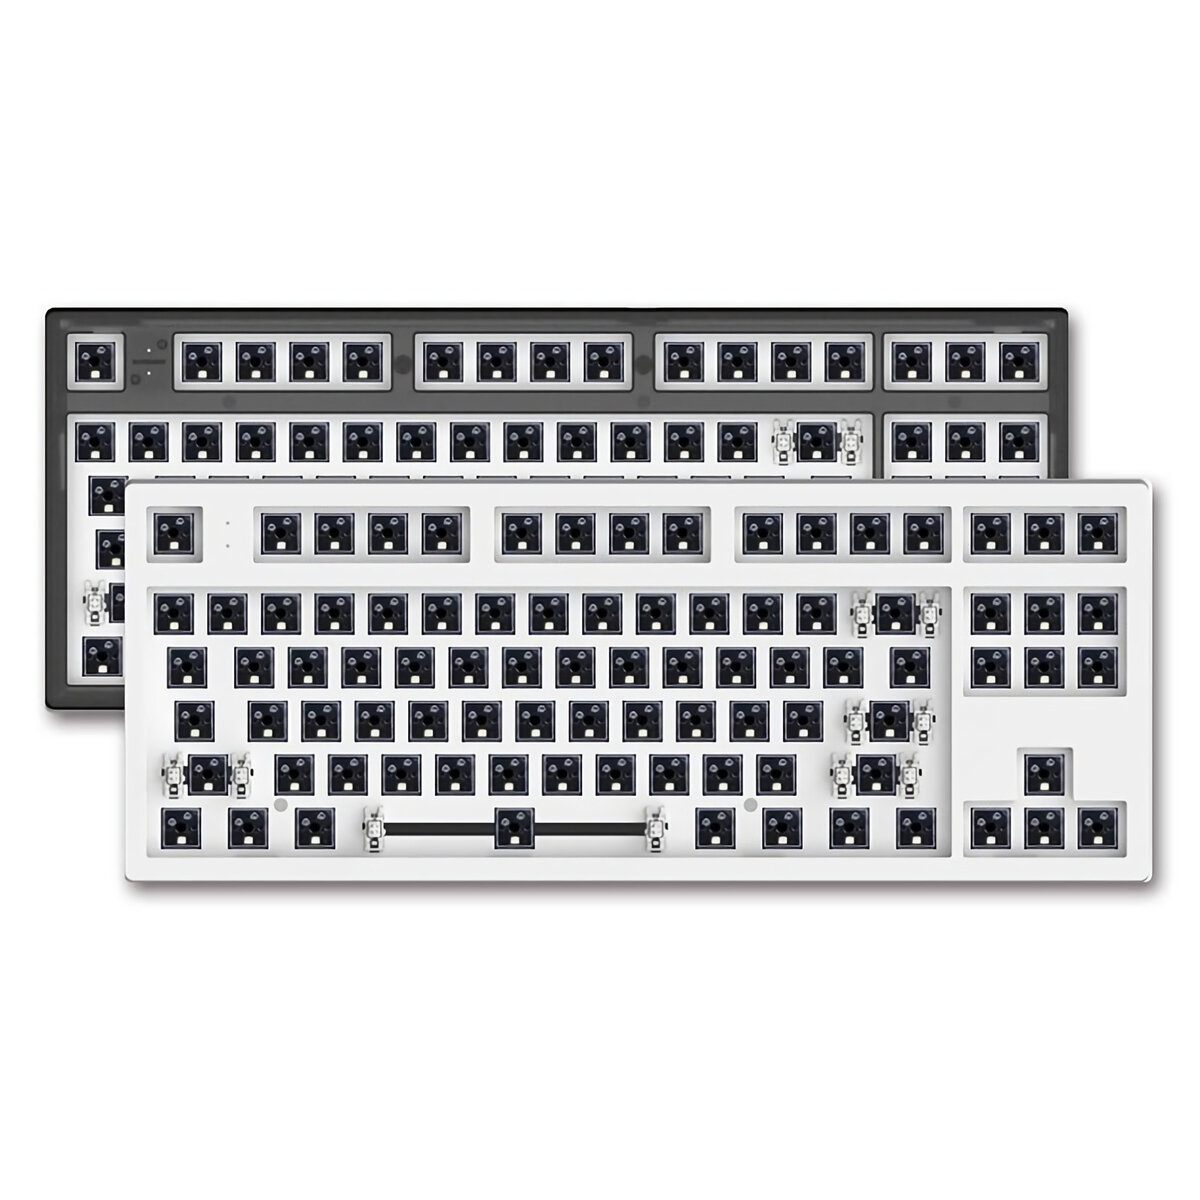 MK870 Keyboard Customized Kit 80% TKL 87 Keys RGB Hot Swappable Programmable PCB Mounting Plate Case